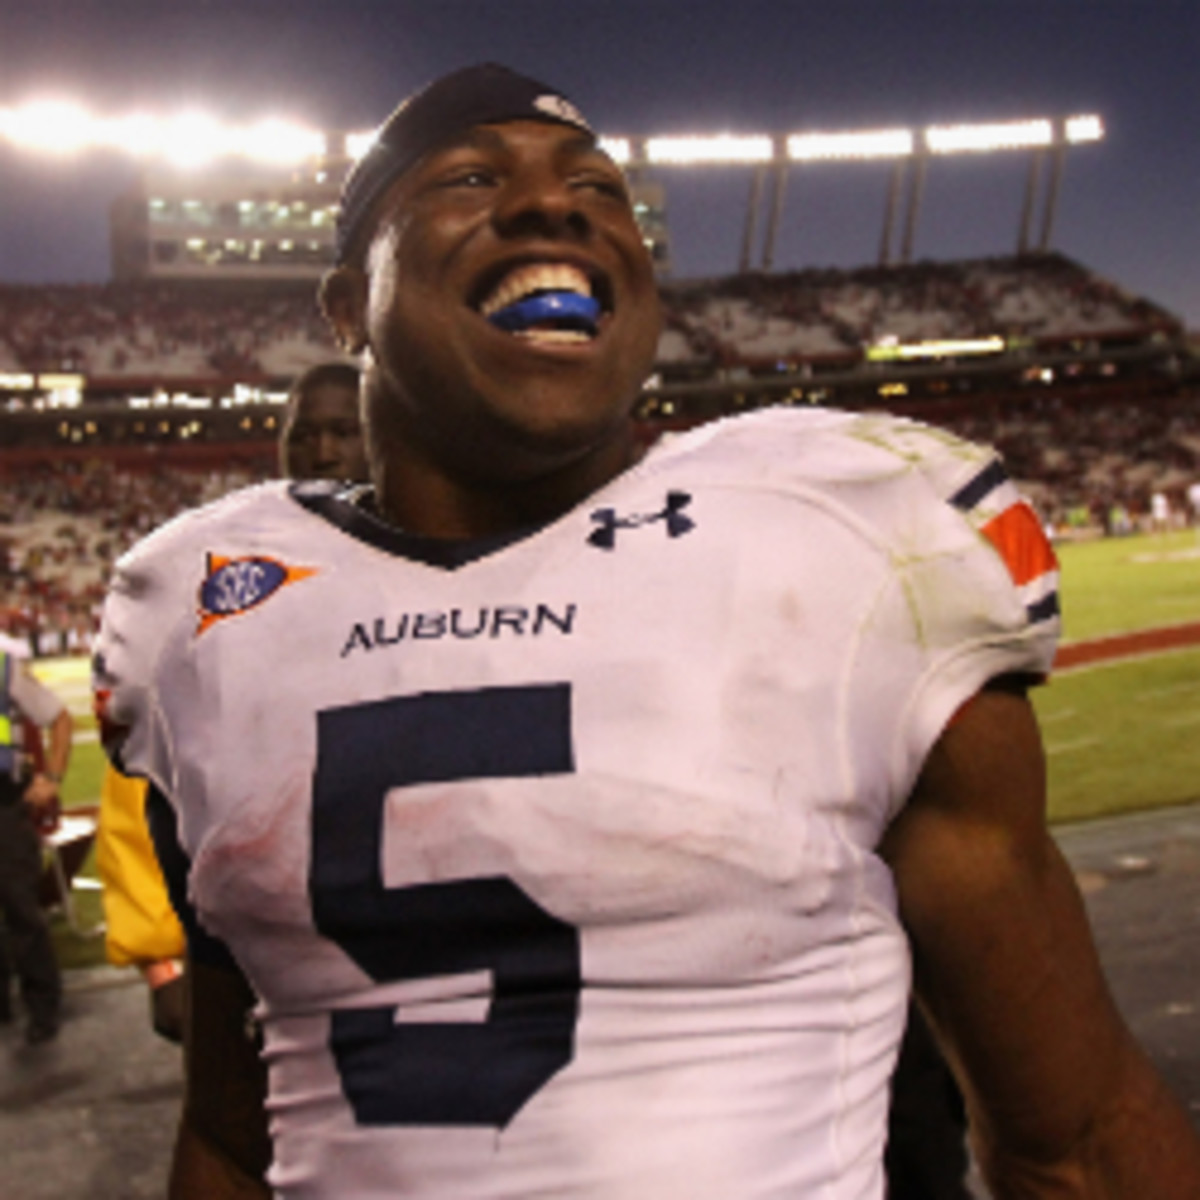 Star running back Michael Dyer was one of 12 Auburn players to fail drug tests during their 2010 national championship run. (Streeter Lecka/Getty Images)